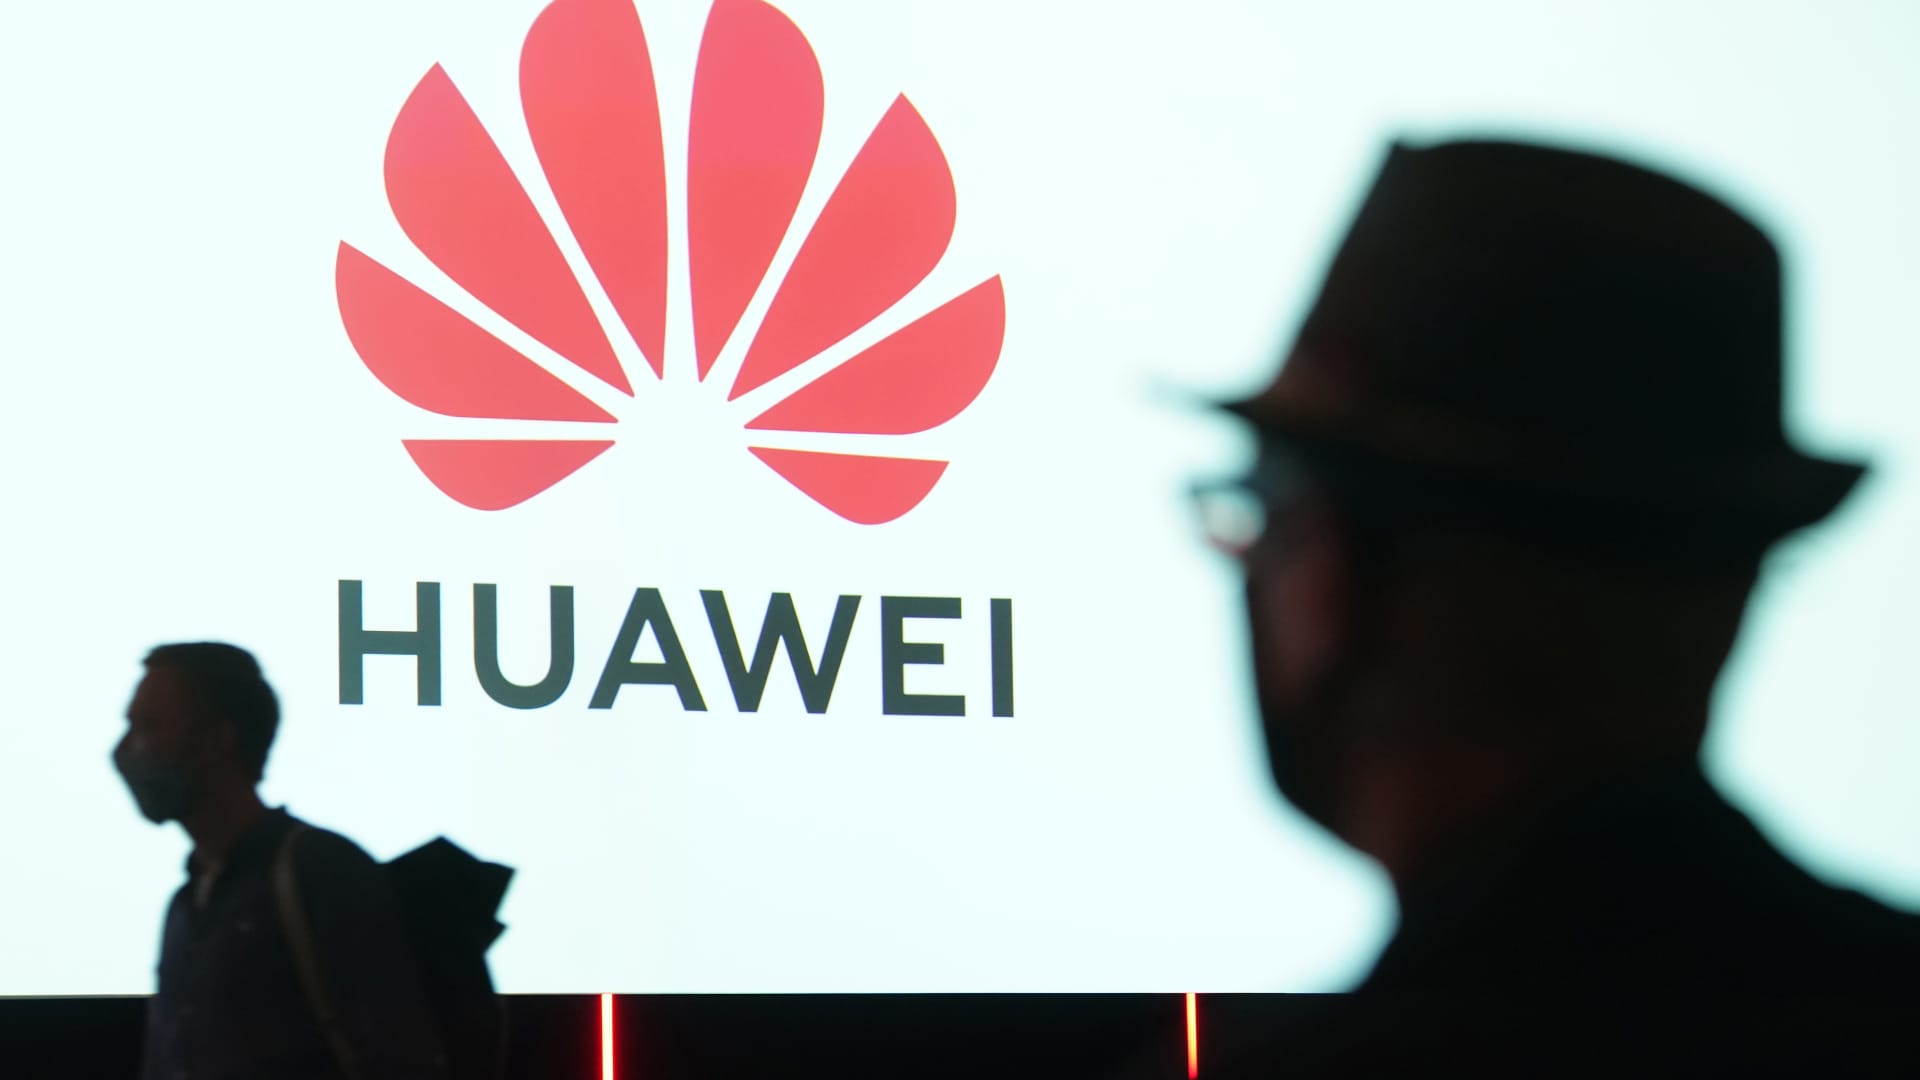 U.S. revokes some export licenses to sell chips to Huawei in a bid to curb China’s tech power